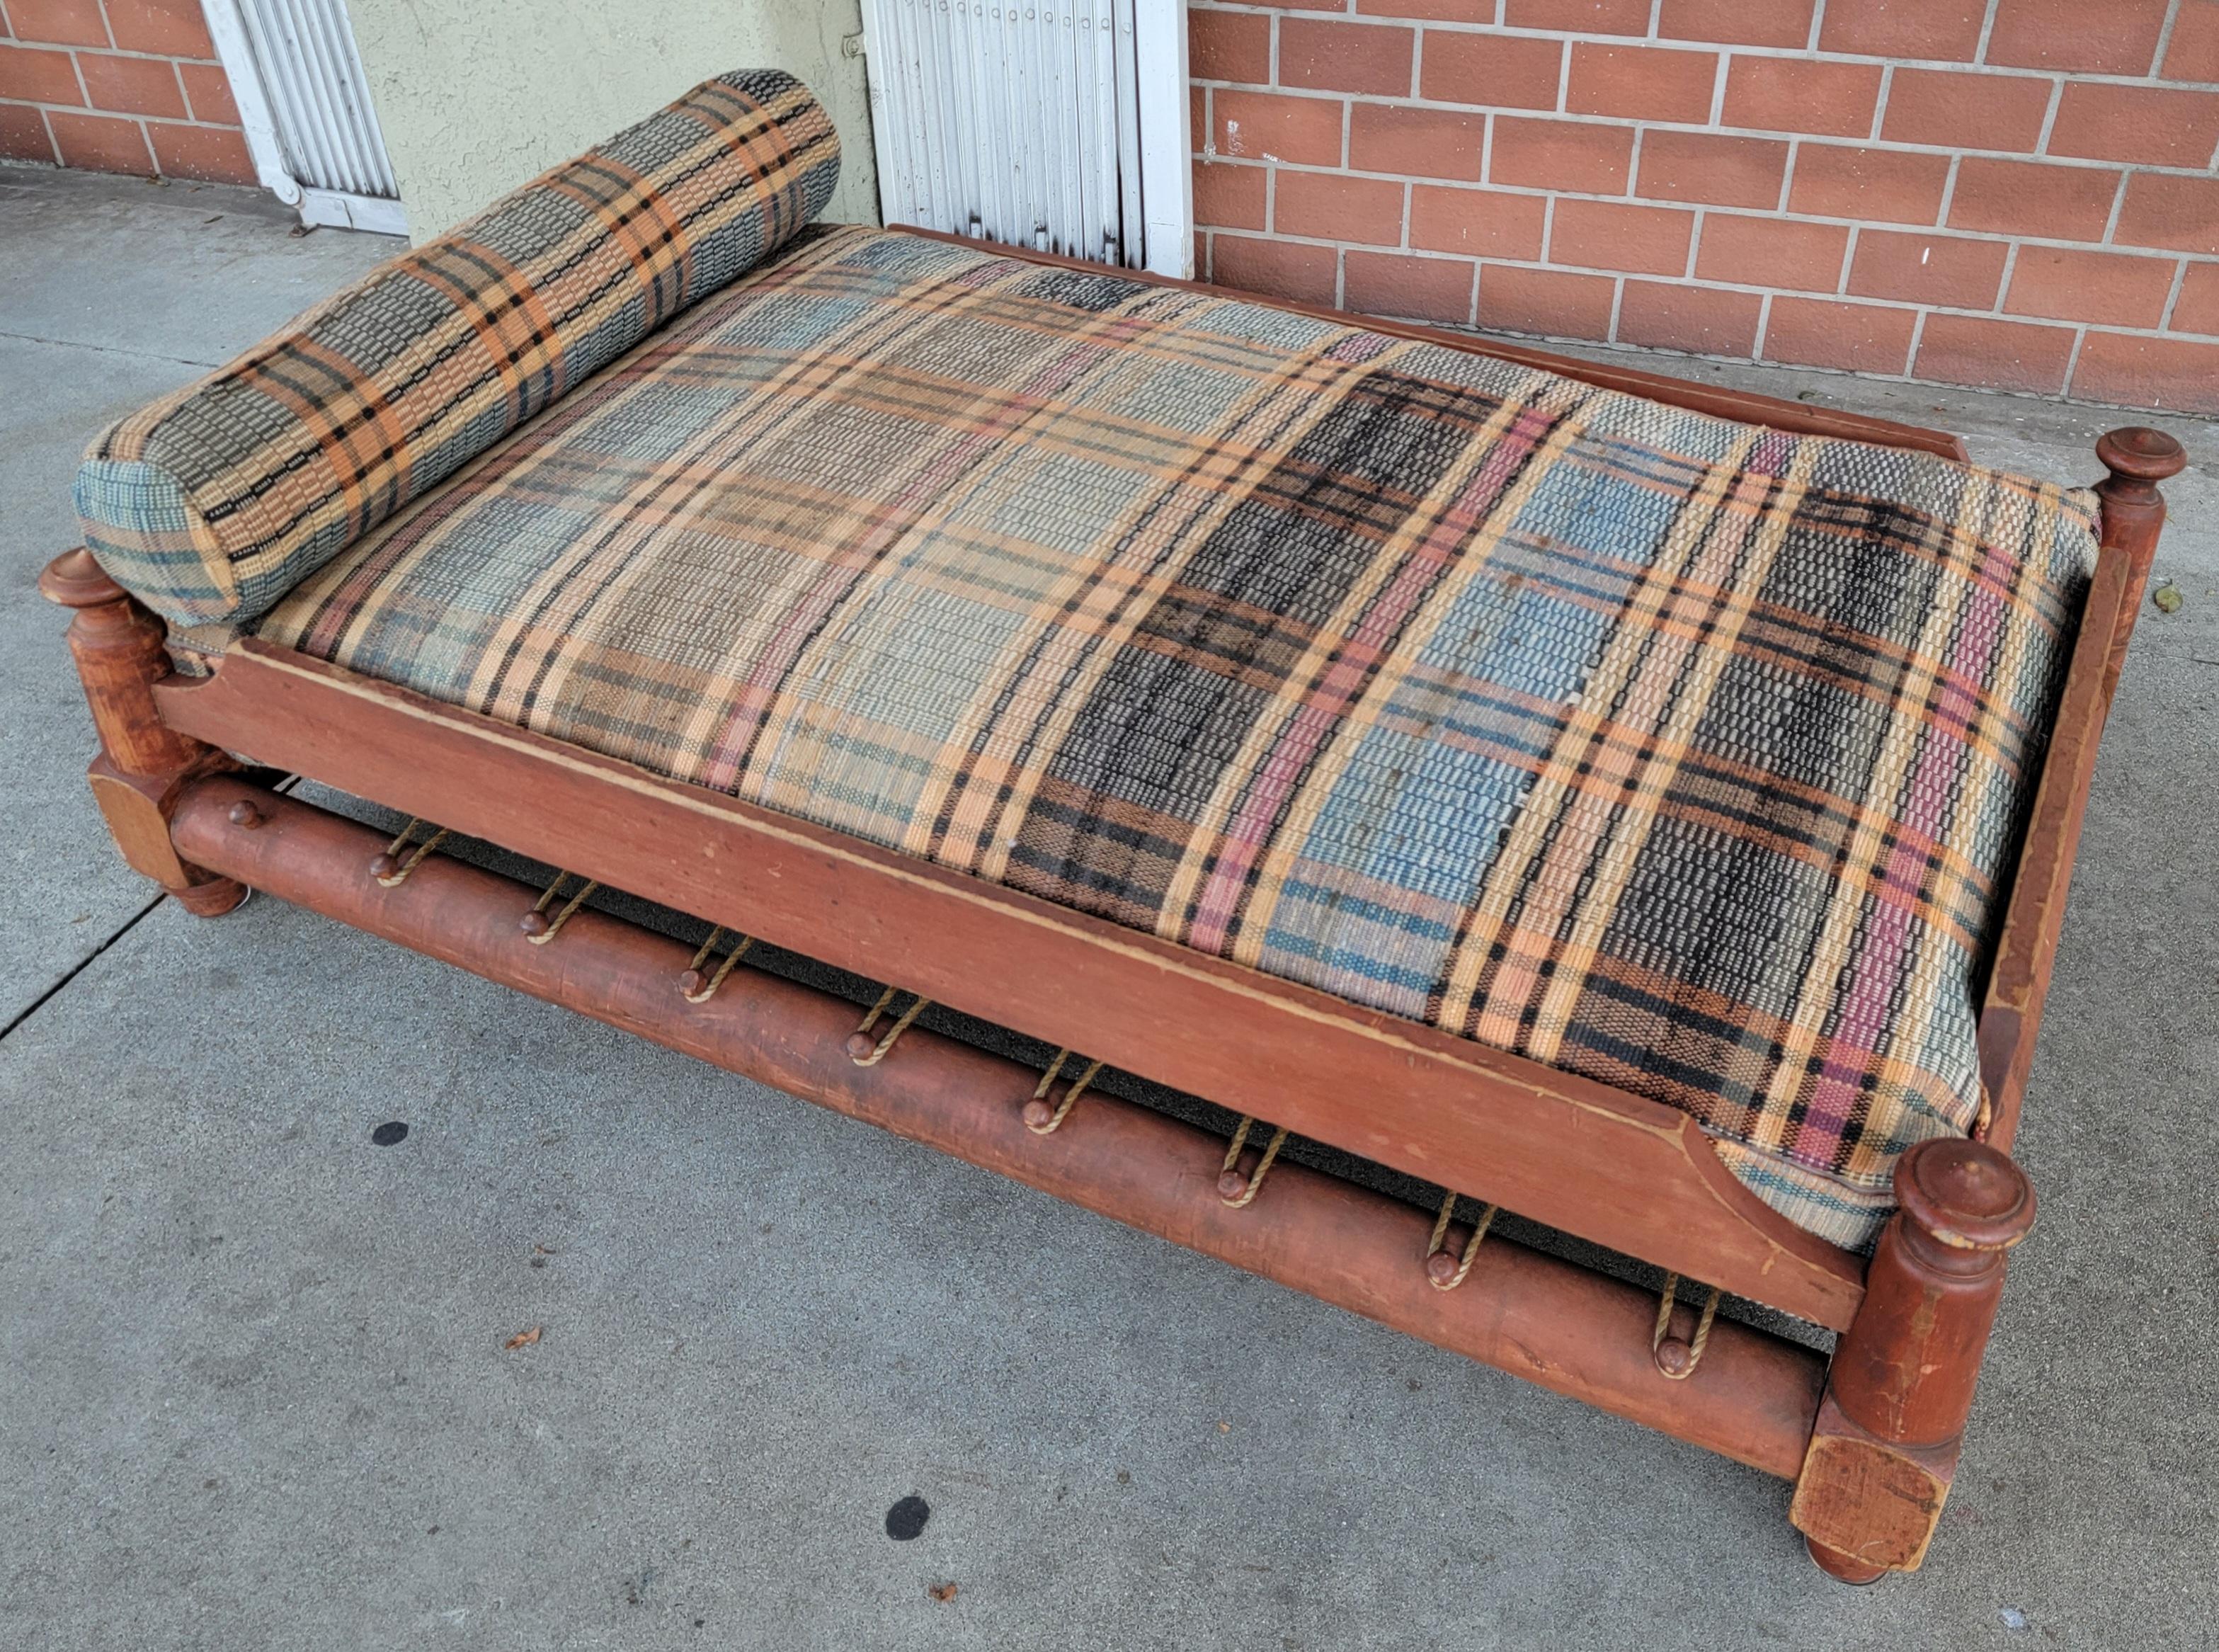 19thc original salmon painted trendle or child's rope bed with a custom made mattress from 19thc rag rug fabric. It comes with rag rug cushions & pillows. This bed is in amazing condition.